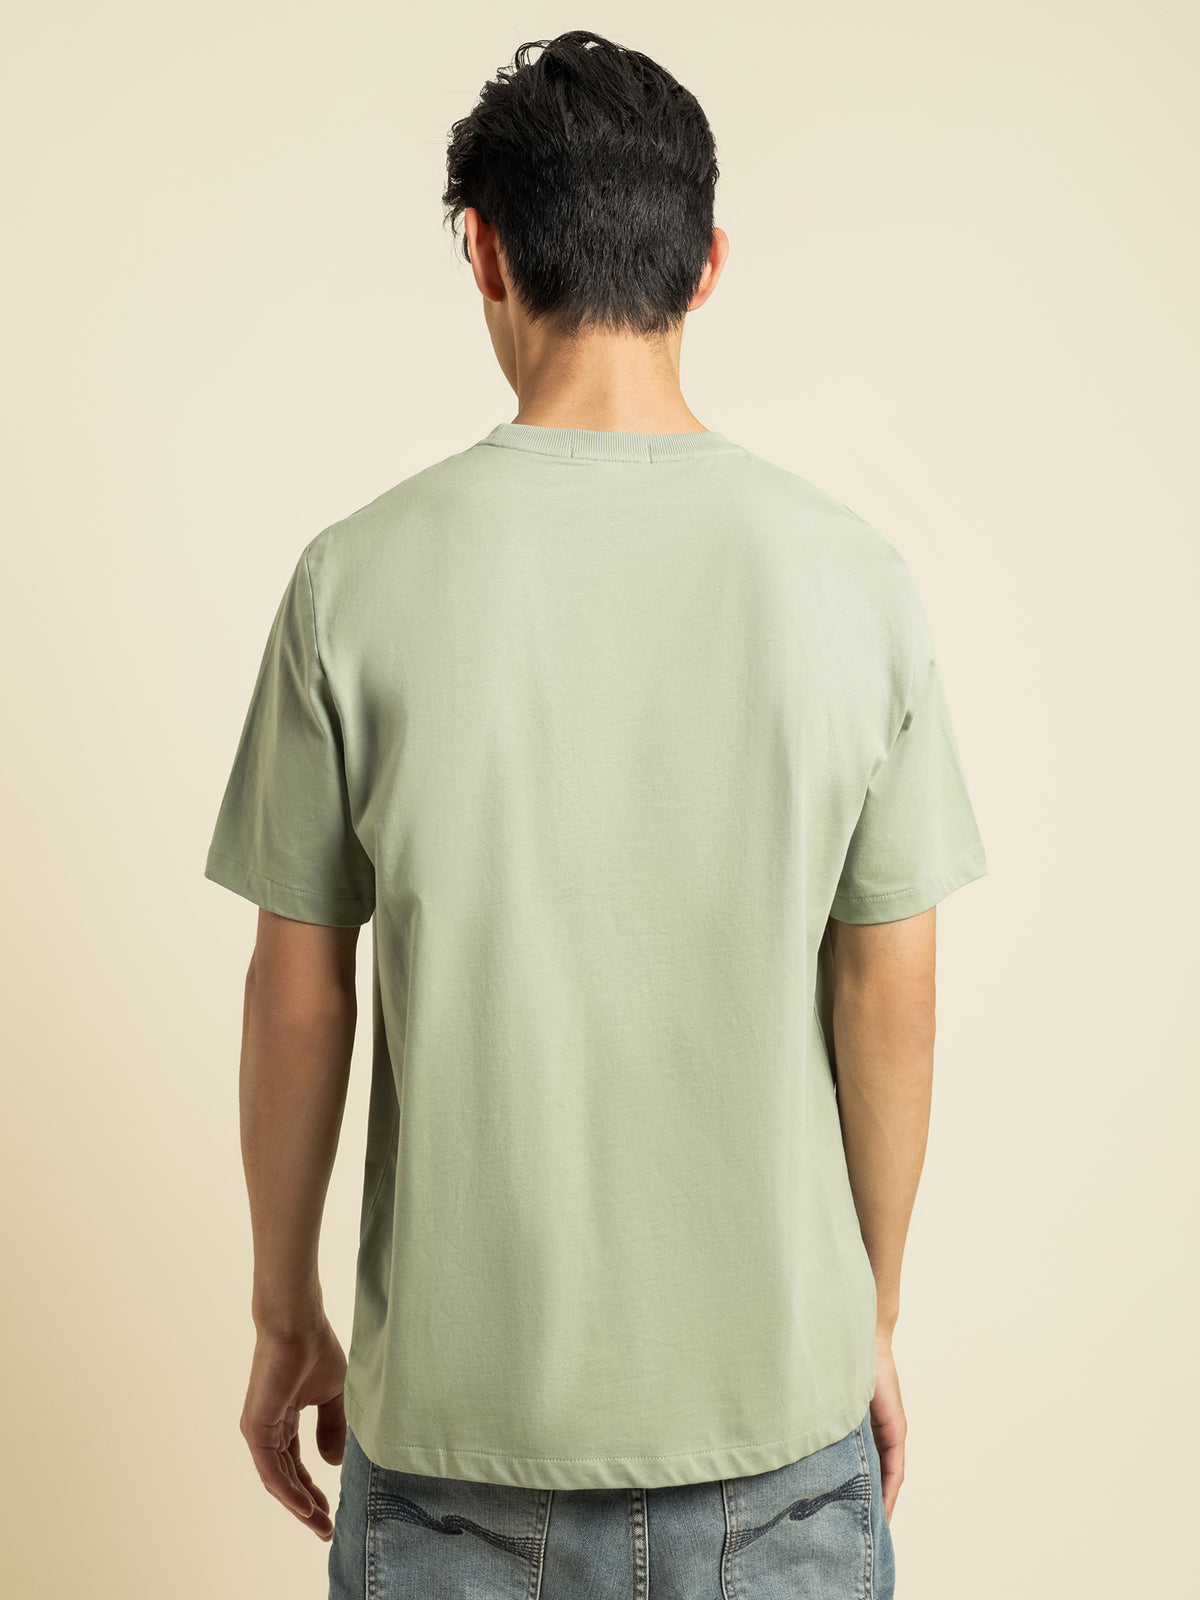 Embroidered T-Shirt in Seagrass